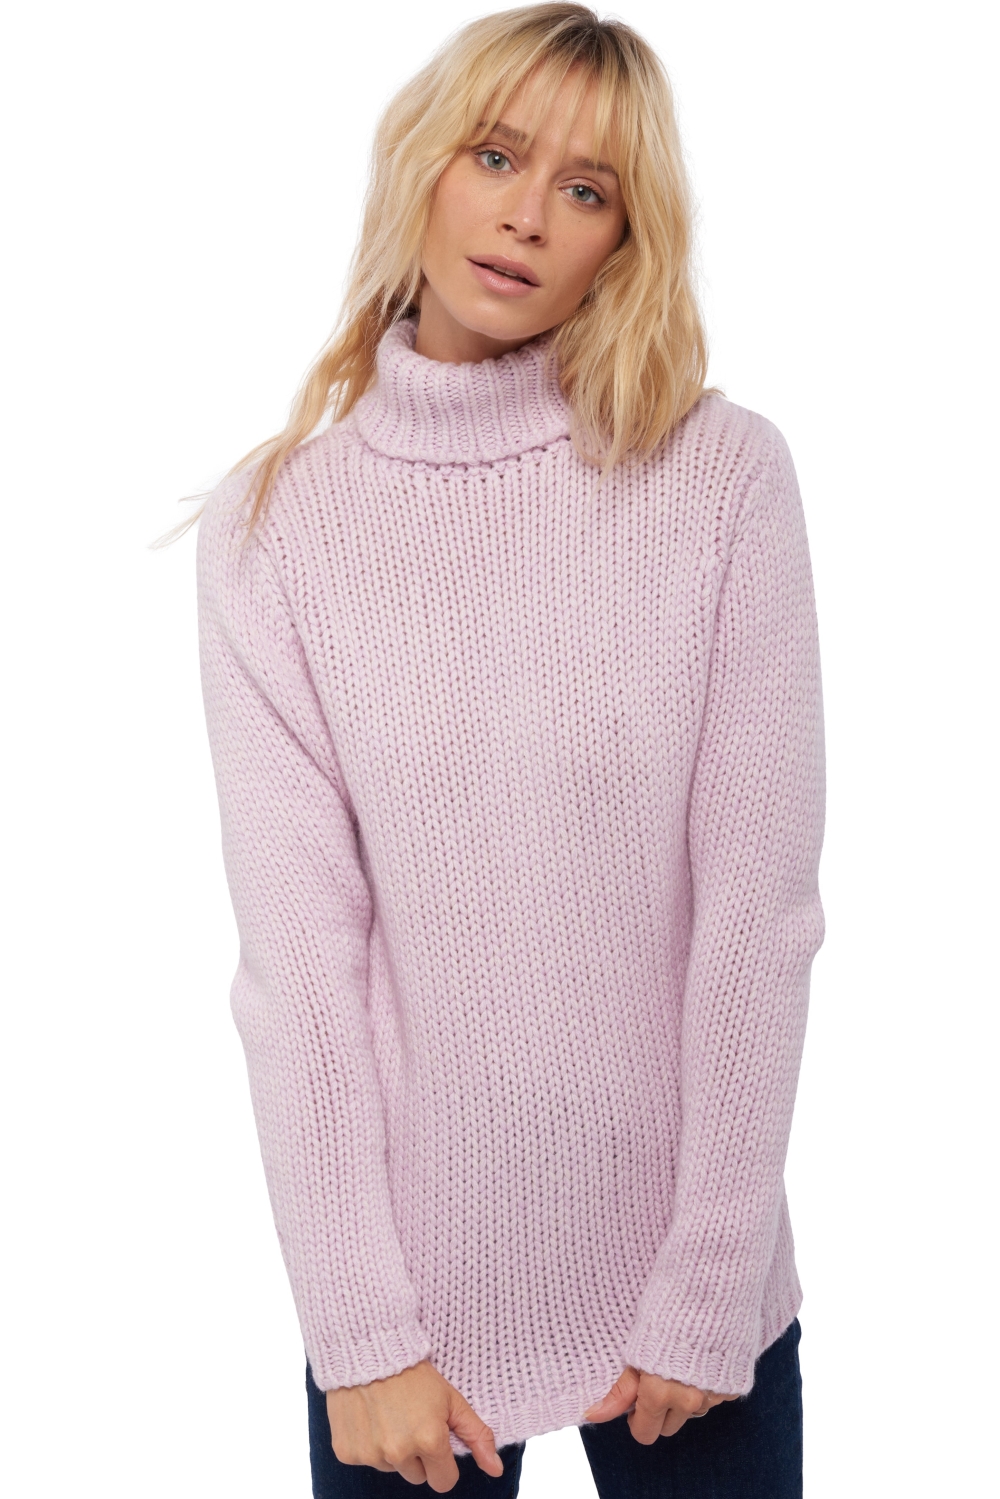 Cashmere ladies chunky sweater vicenza lilas shinking violet s